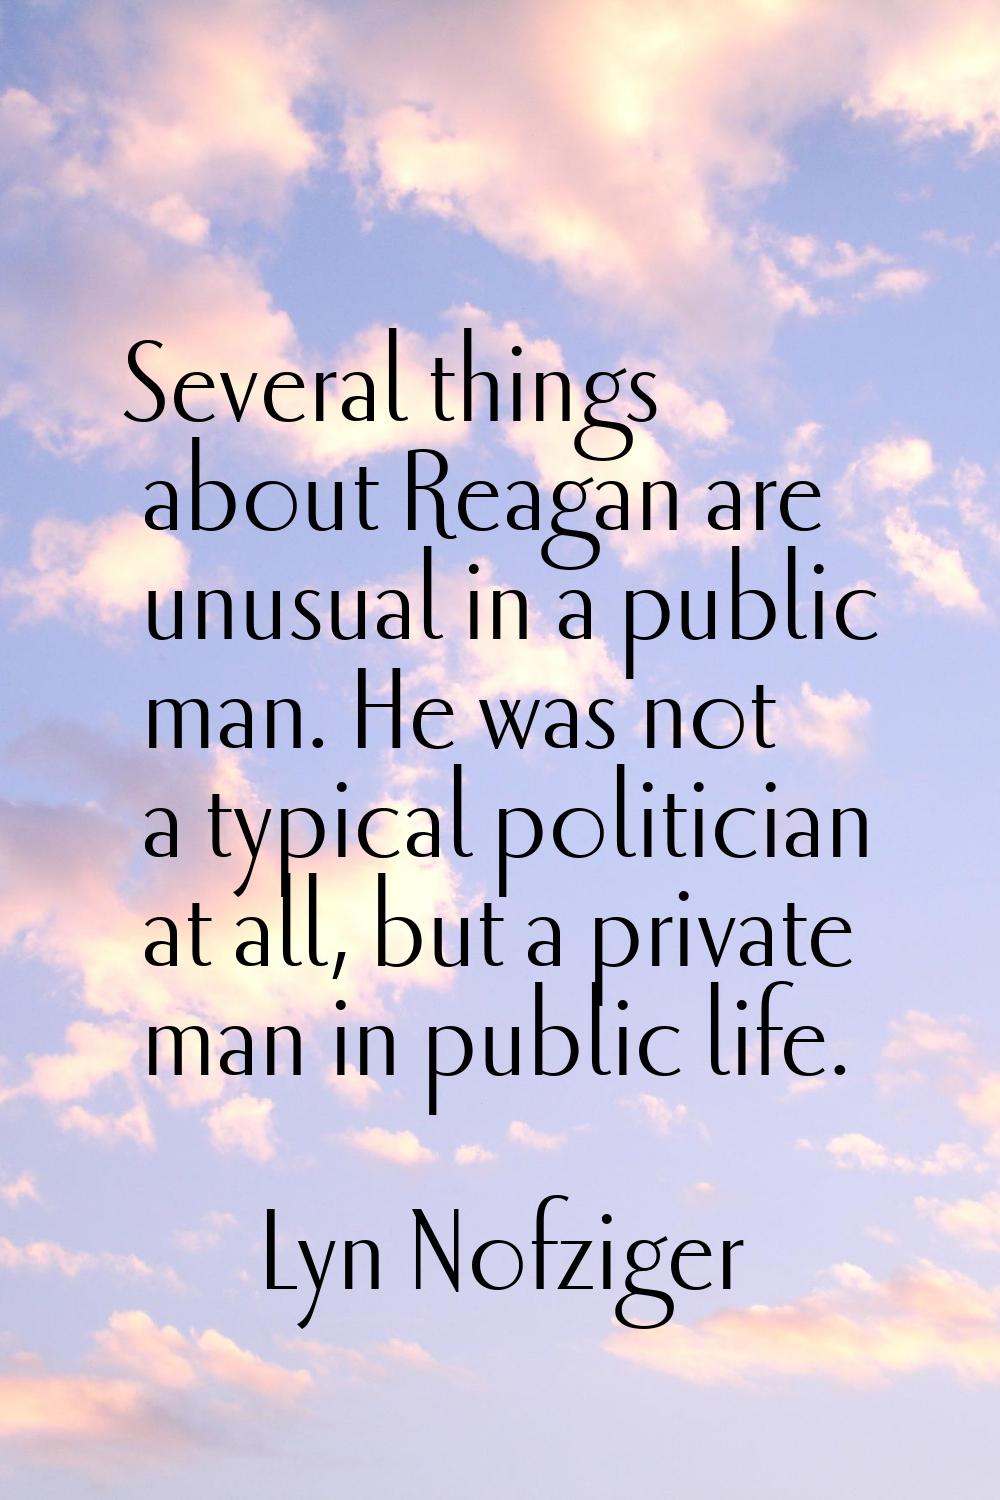 Several things about Reagan are unusual in a public man. He was not a typical politician at all, bu